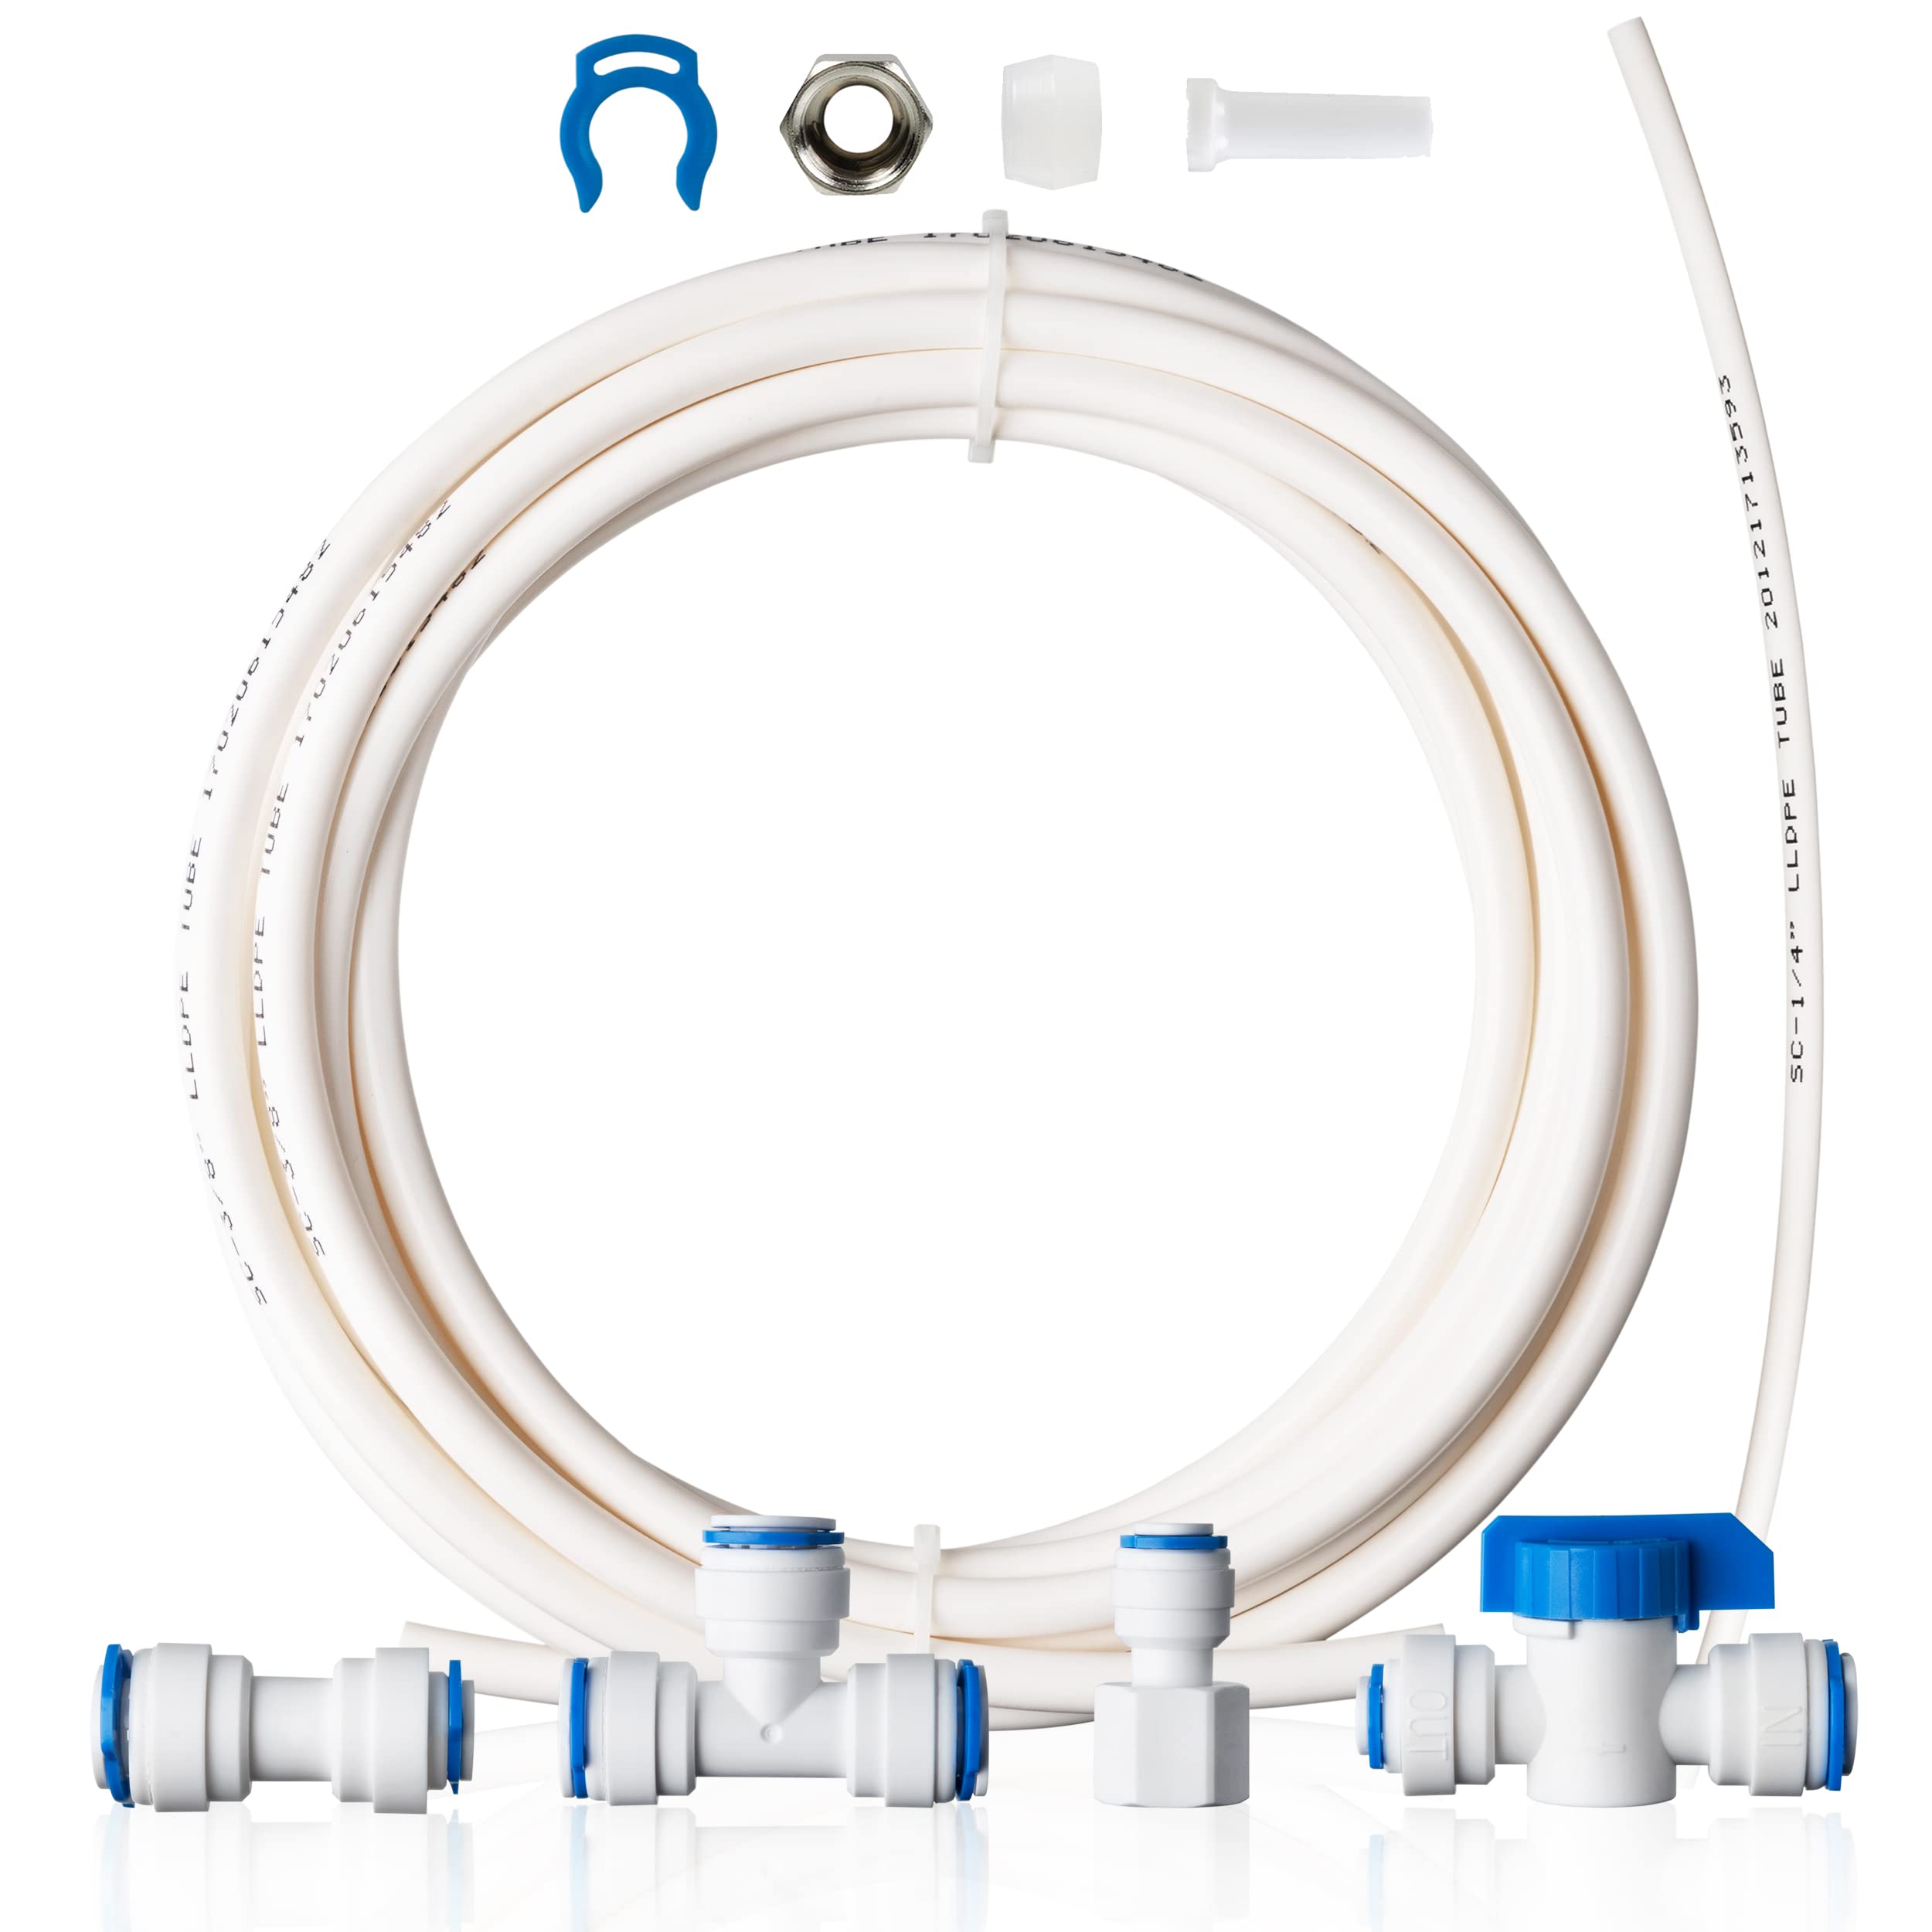 iSpring ICEK3 3/8" Tubing Water Line Splitter and Reverse Osmosis Refrigerator Ice Maker Kit, Fits PH100, RO100, US15 Series, 20 feet, Everything Included for Installation